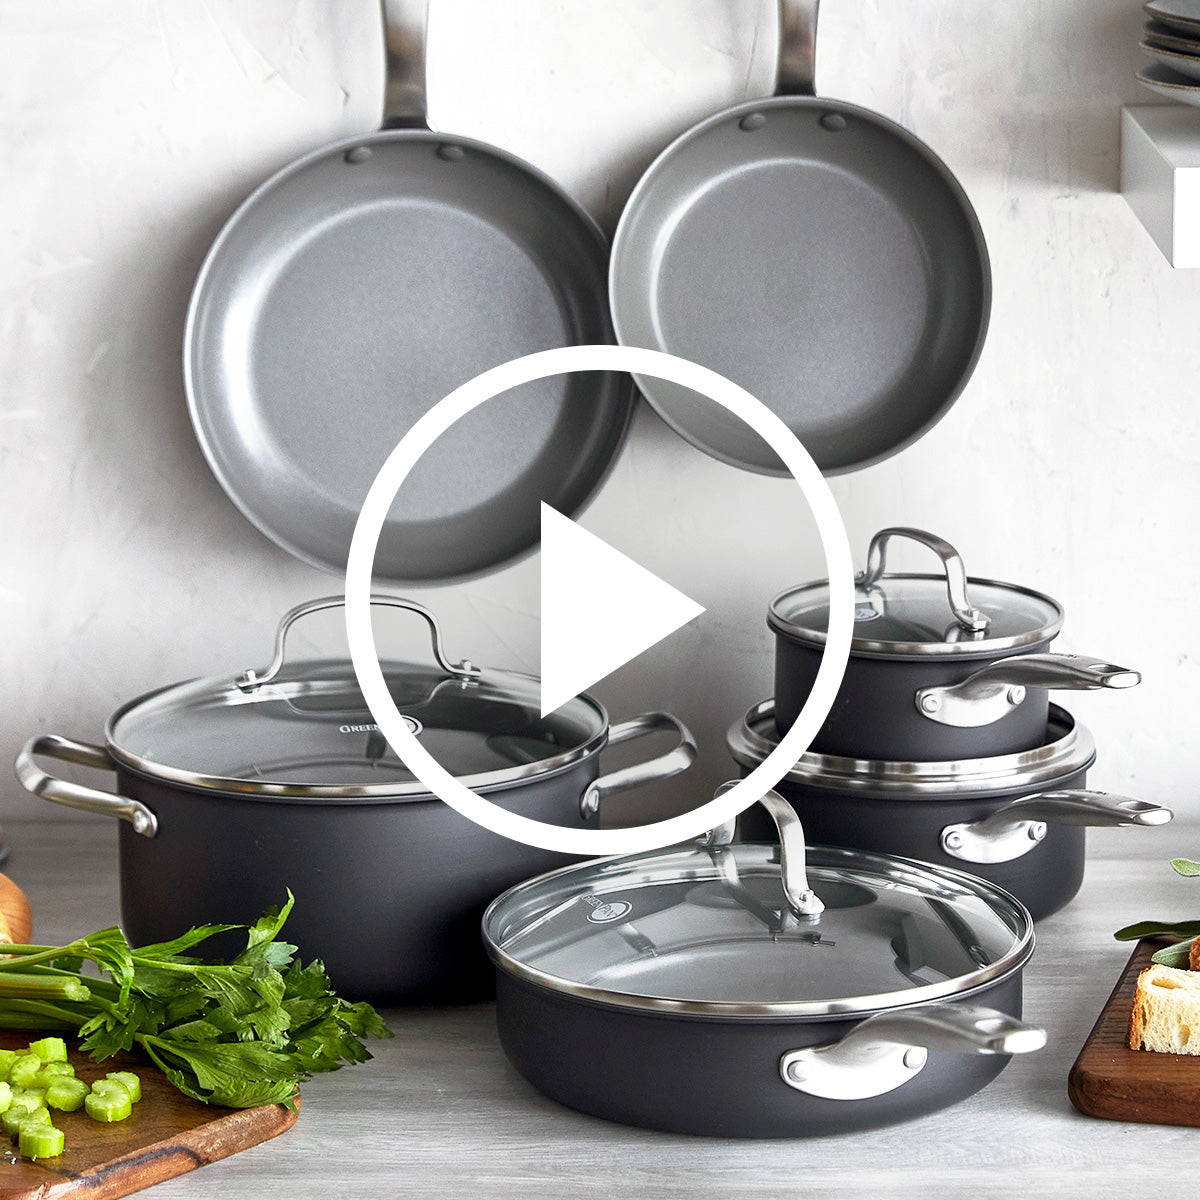 This 5-piece Greenpan cookware set is on sale at